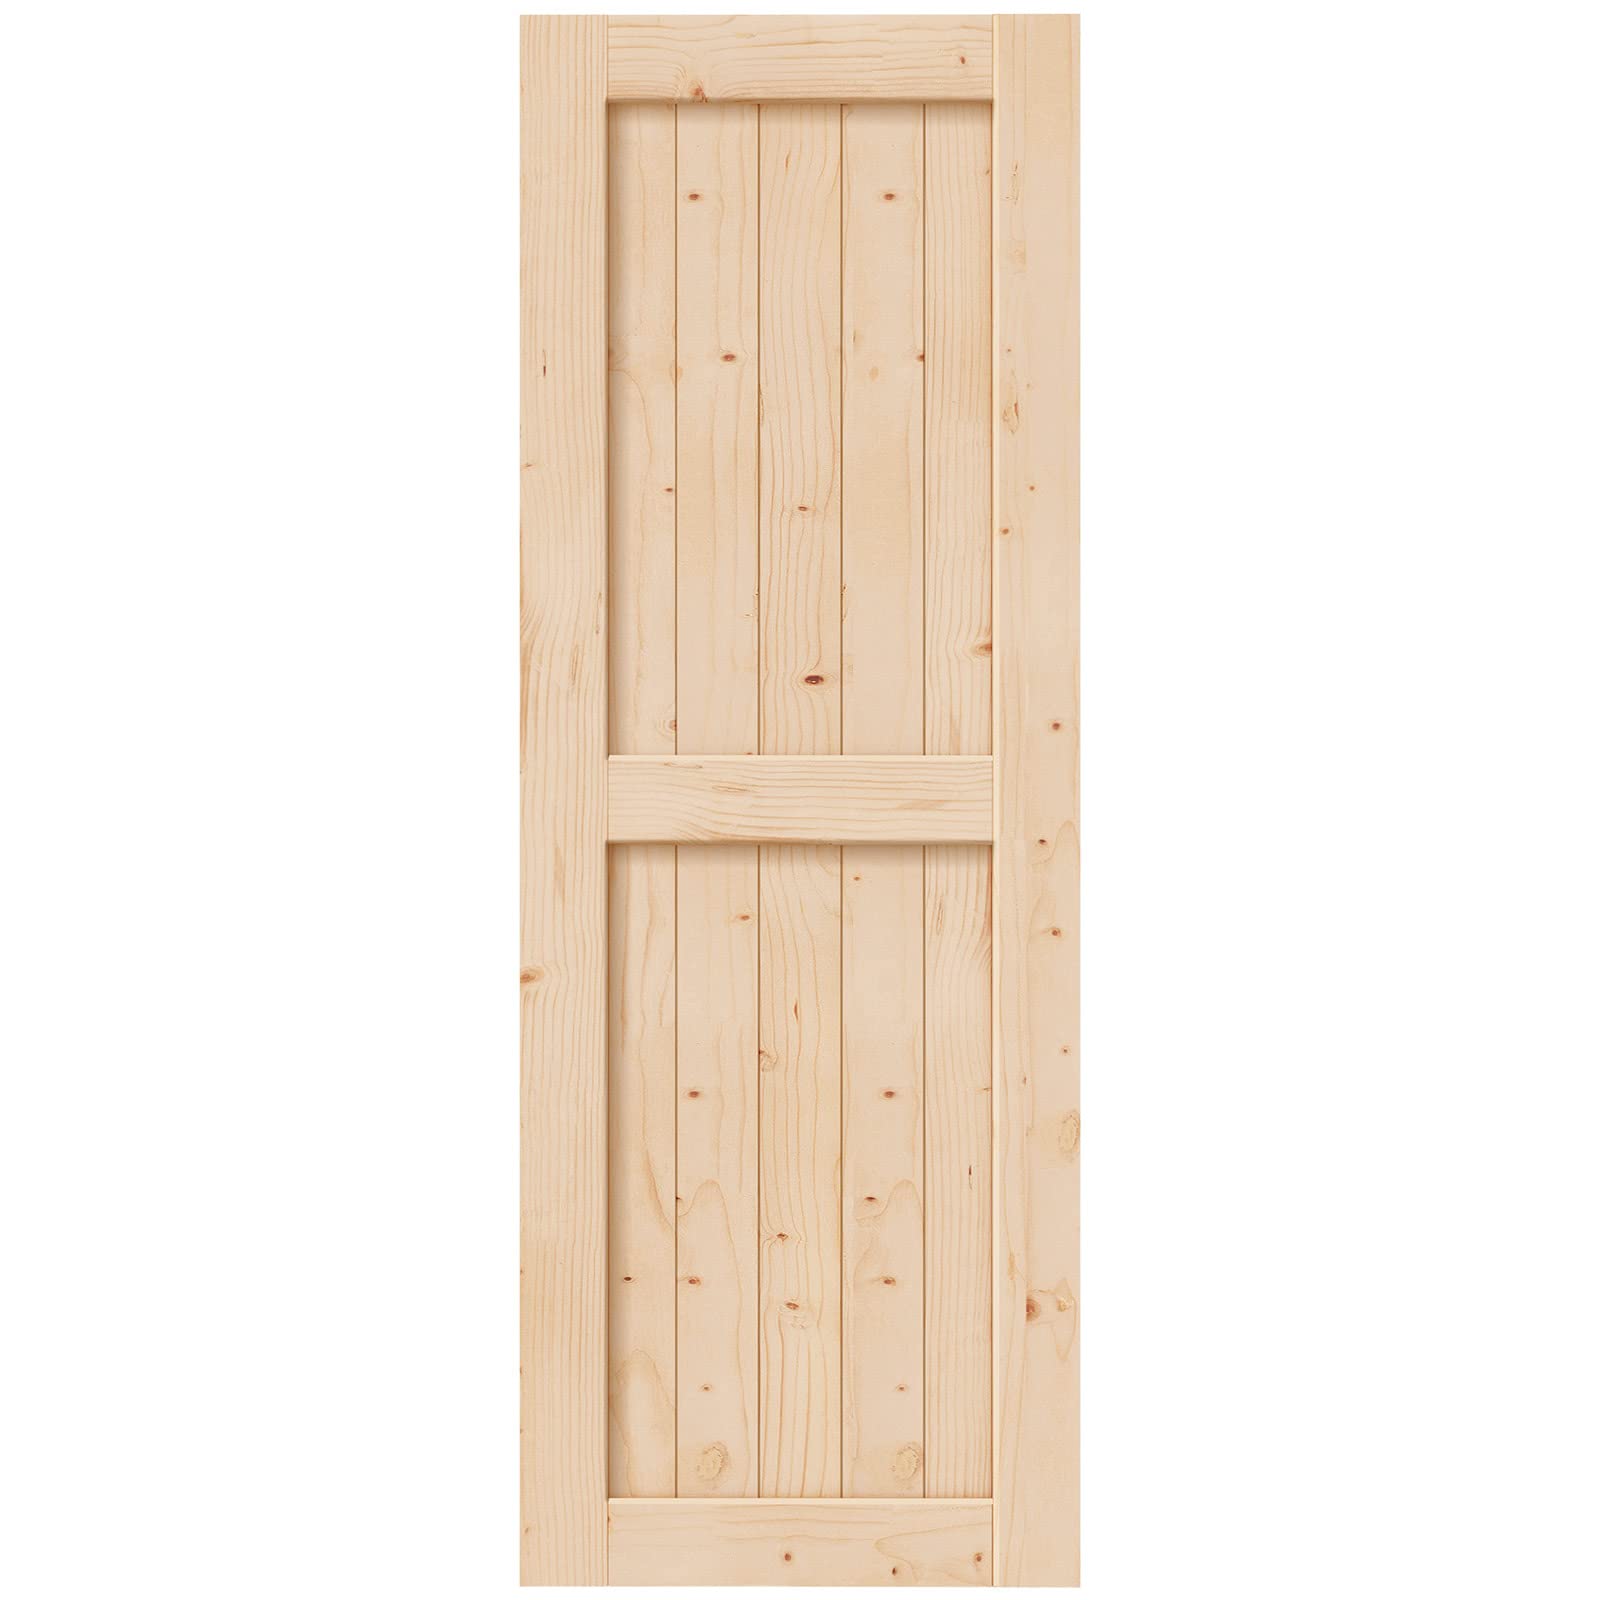 EaseLife 32in x 84in Sliding Barn Wood Door,Interior Doors,DIY Assemblely,Solid Natural Spruce Panelled Slab,Easy Install,Apply to Rooms & Storage Closet,H-Frame